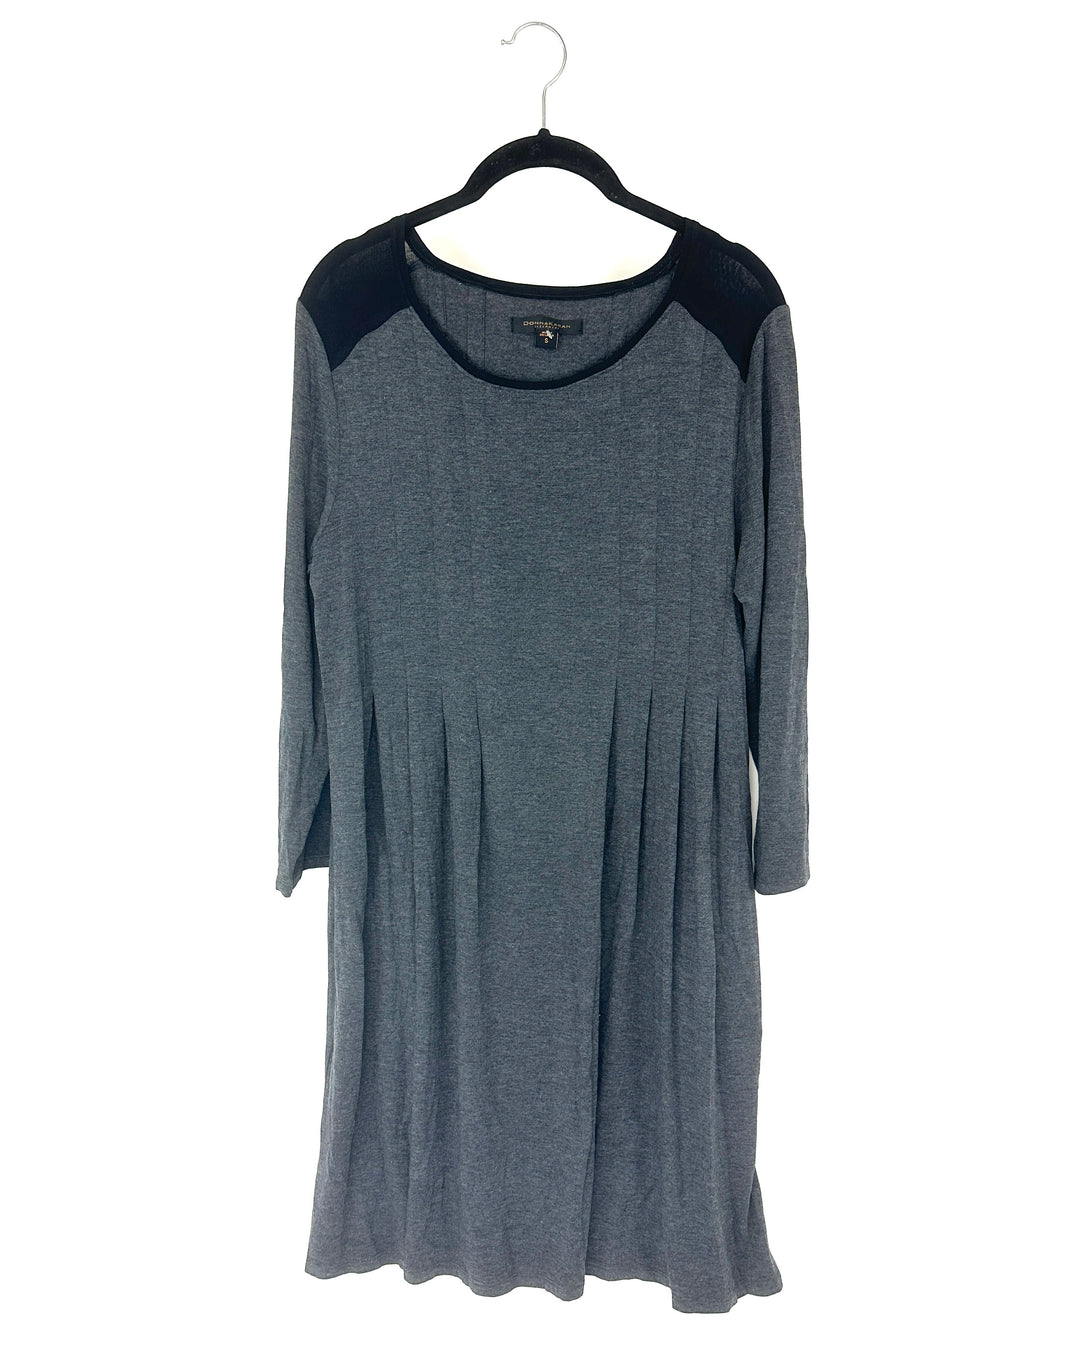 Grey Crop Sleeve Nightgown With Black Color Blocks - Small